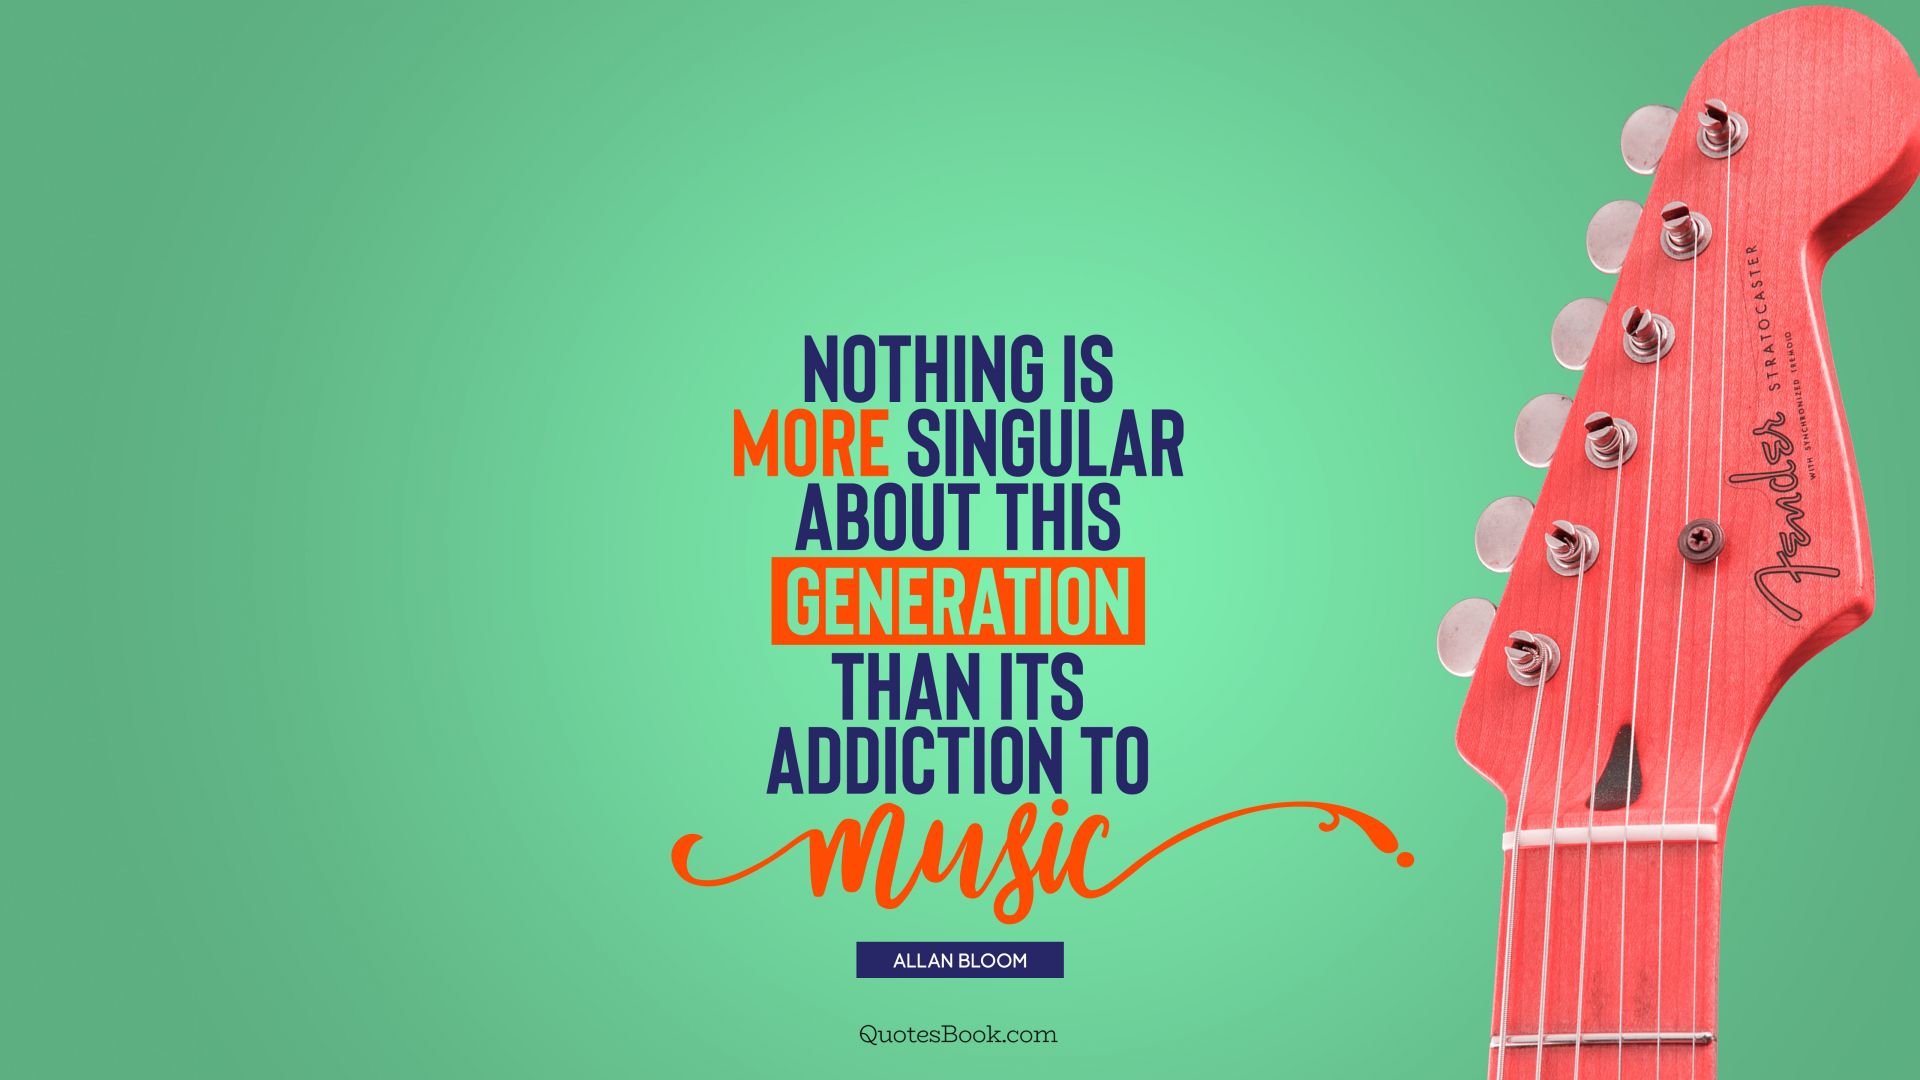 Nothing is more singular about this generation than its addiction to music. - Quote by Allan Bloom